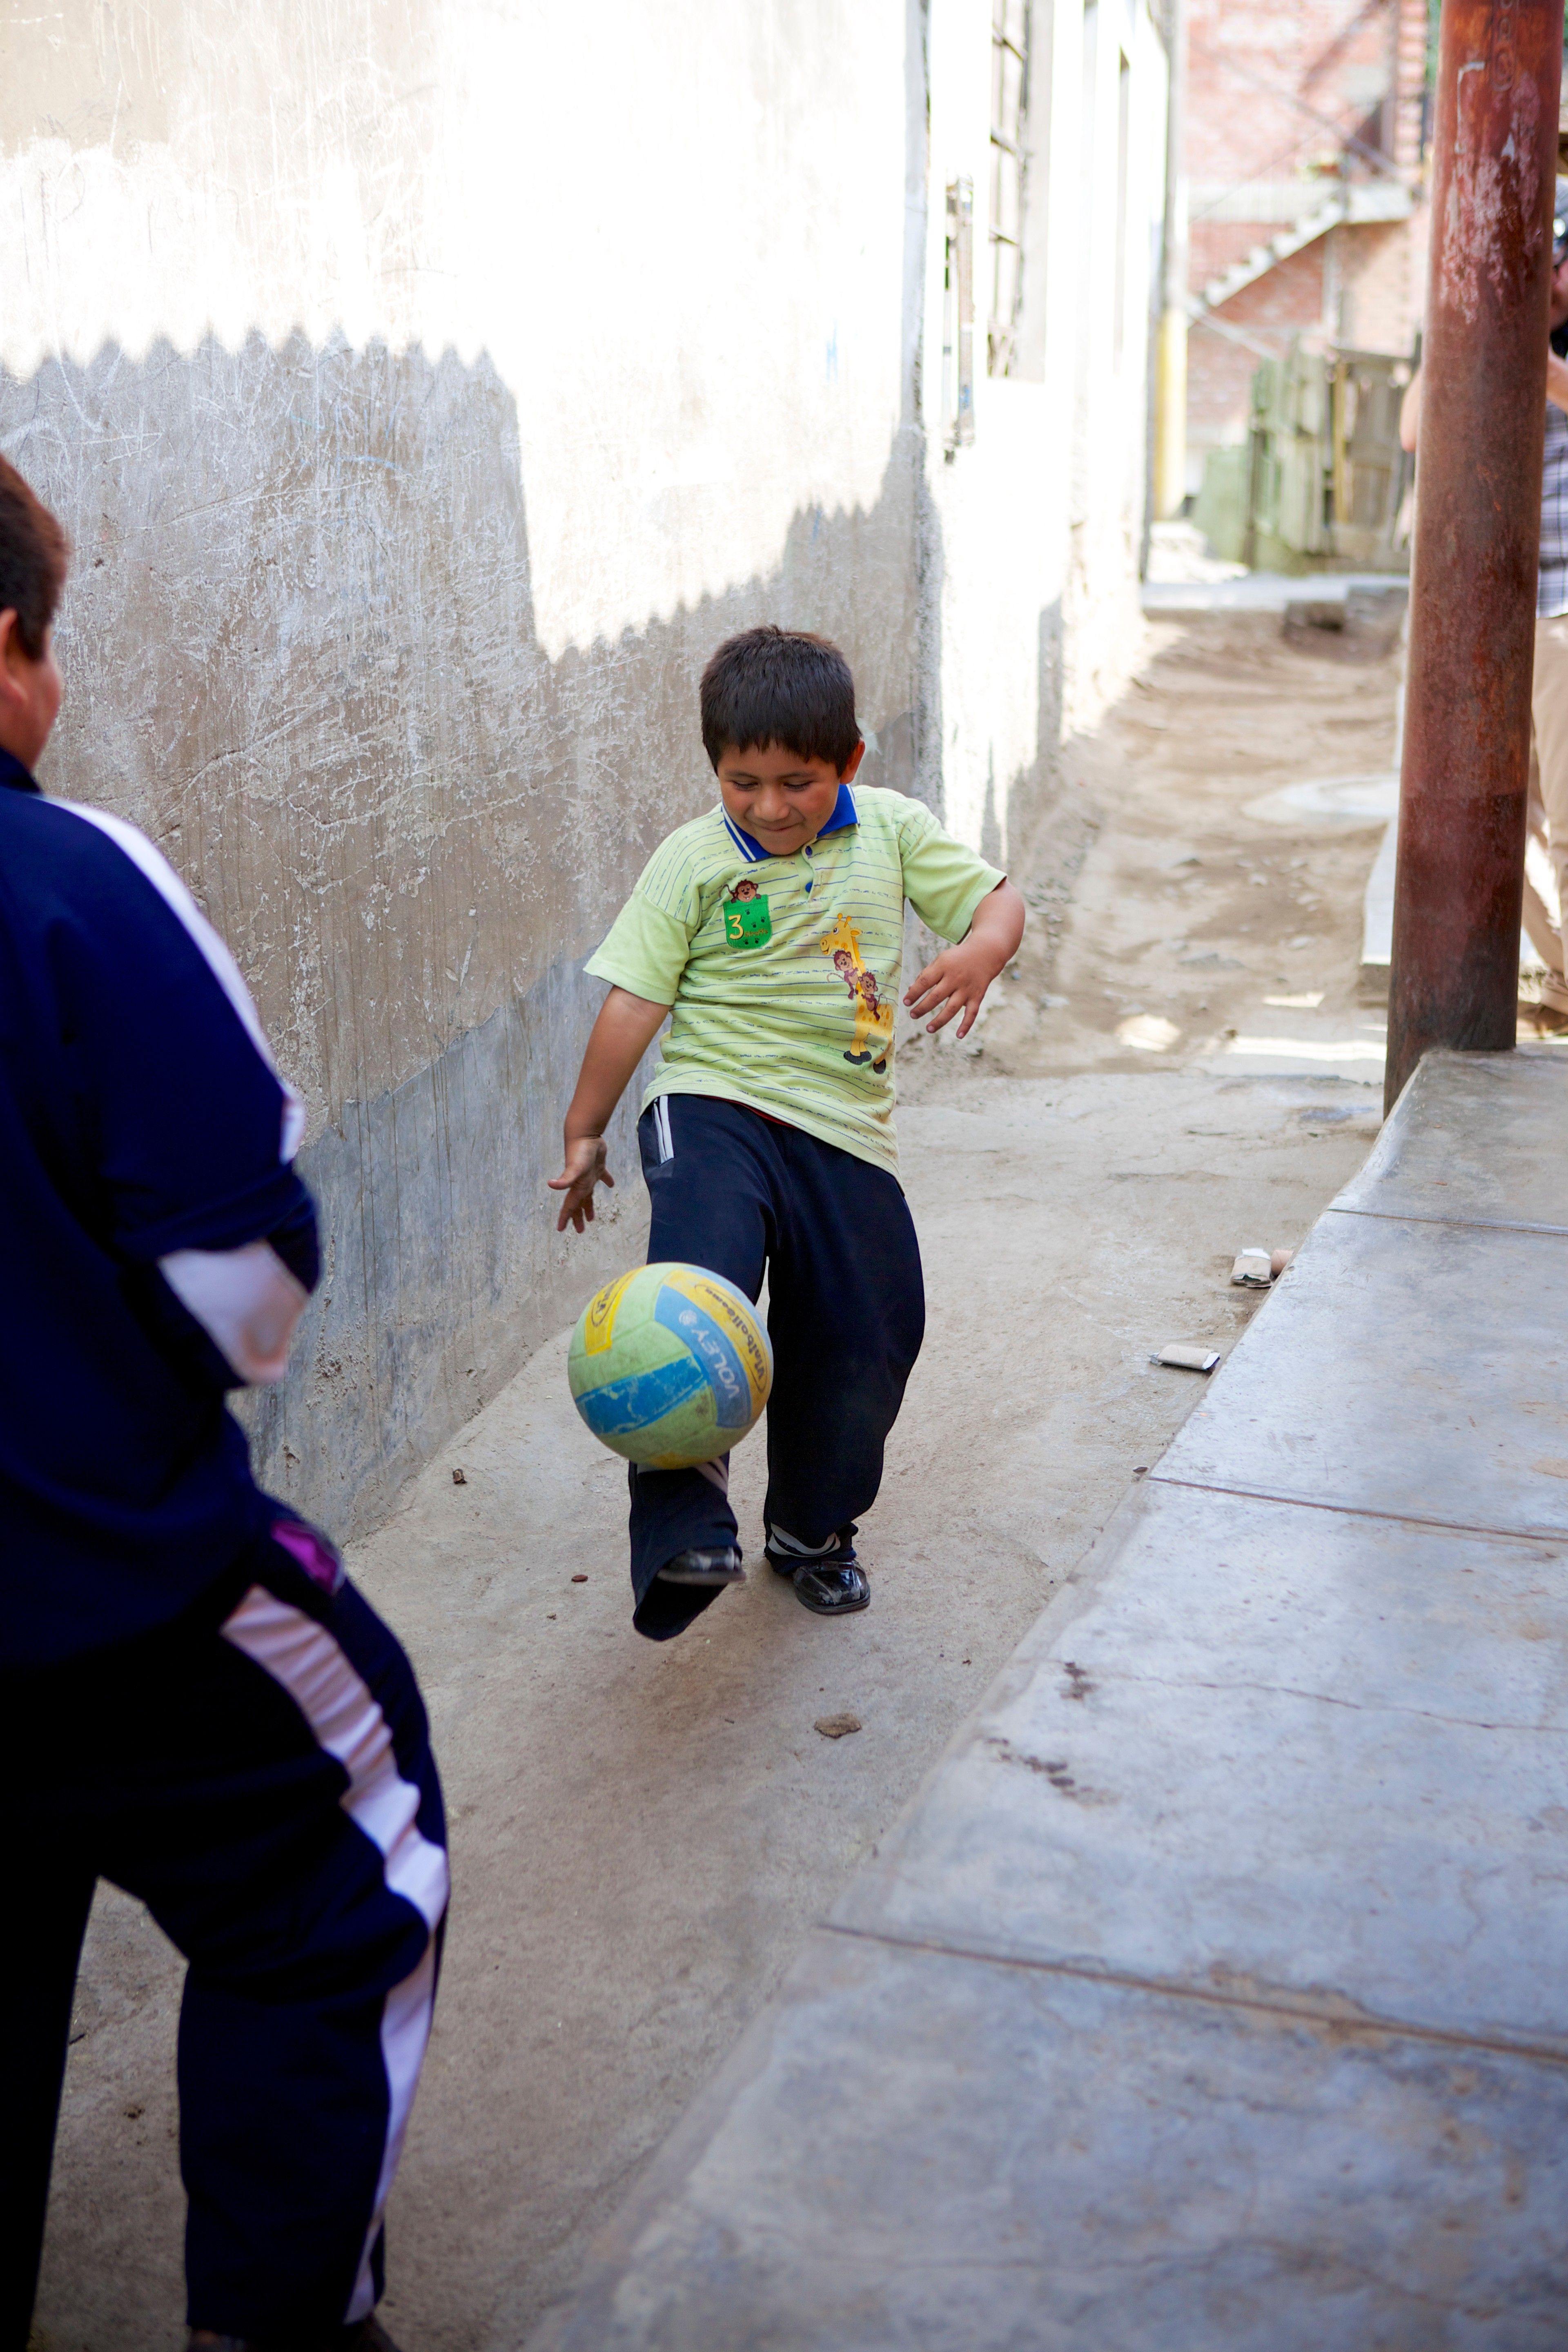 Two Peruvian boys play soccer together in an alleyway.  